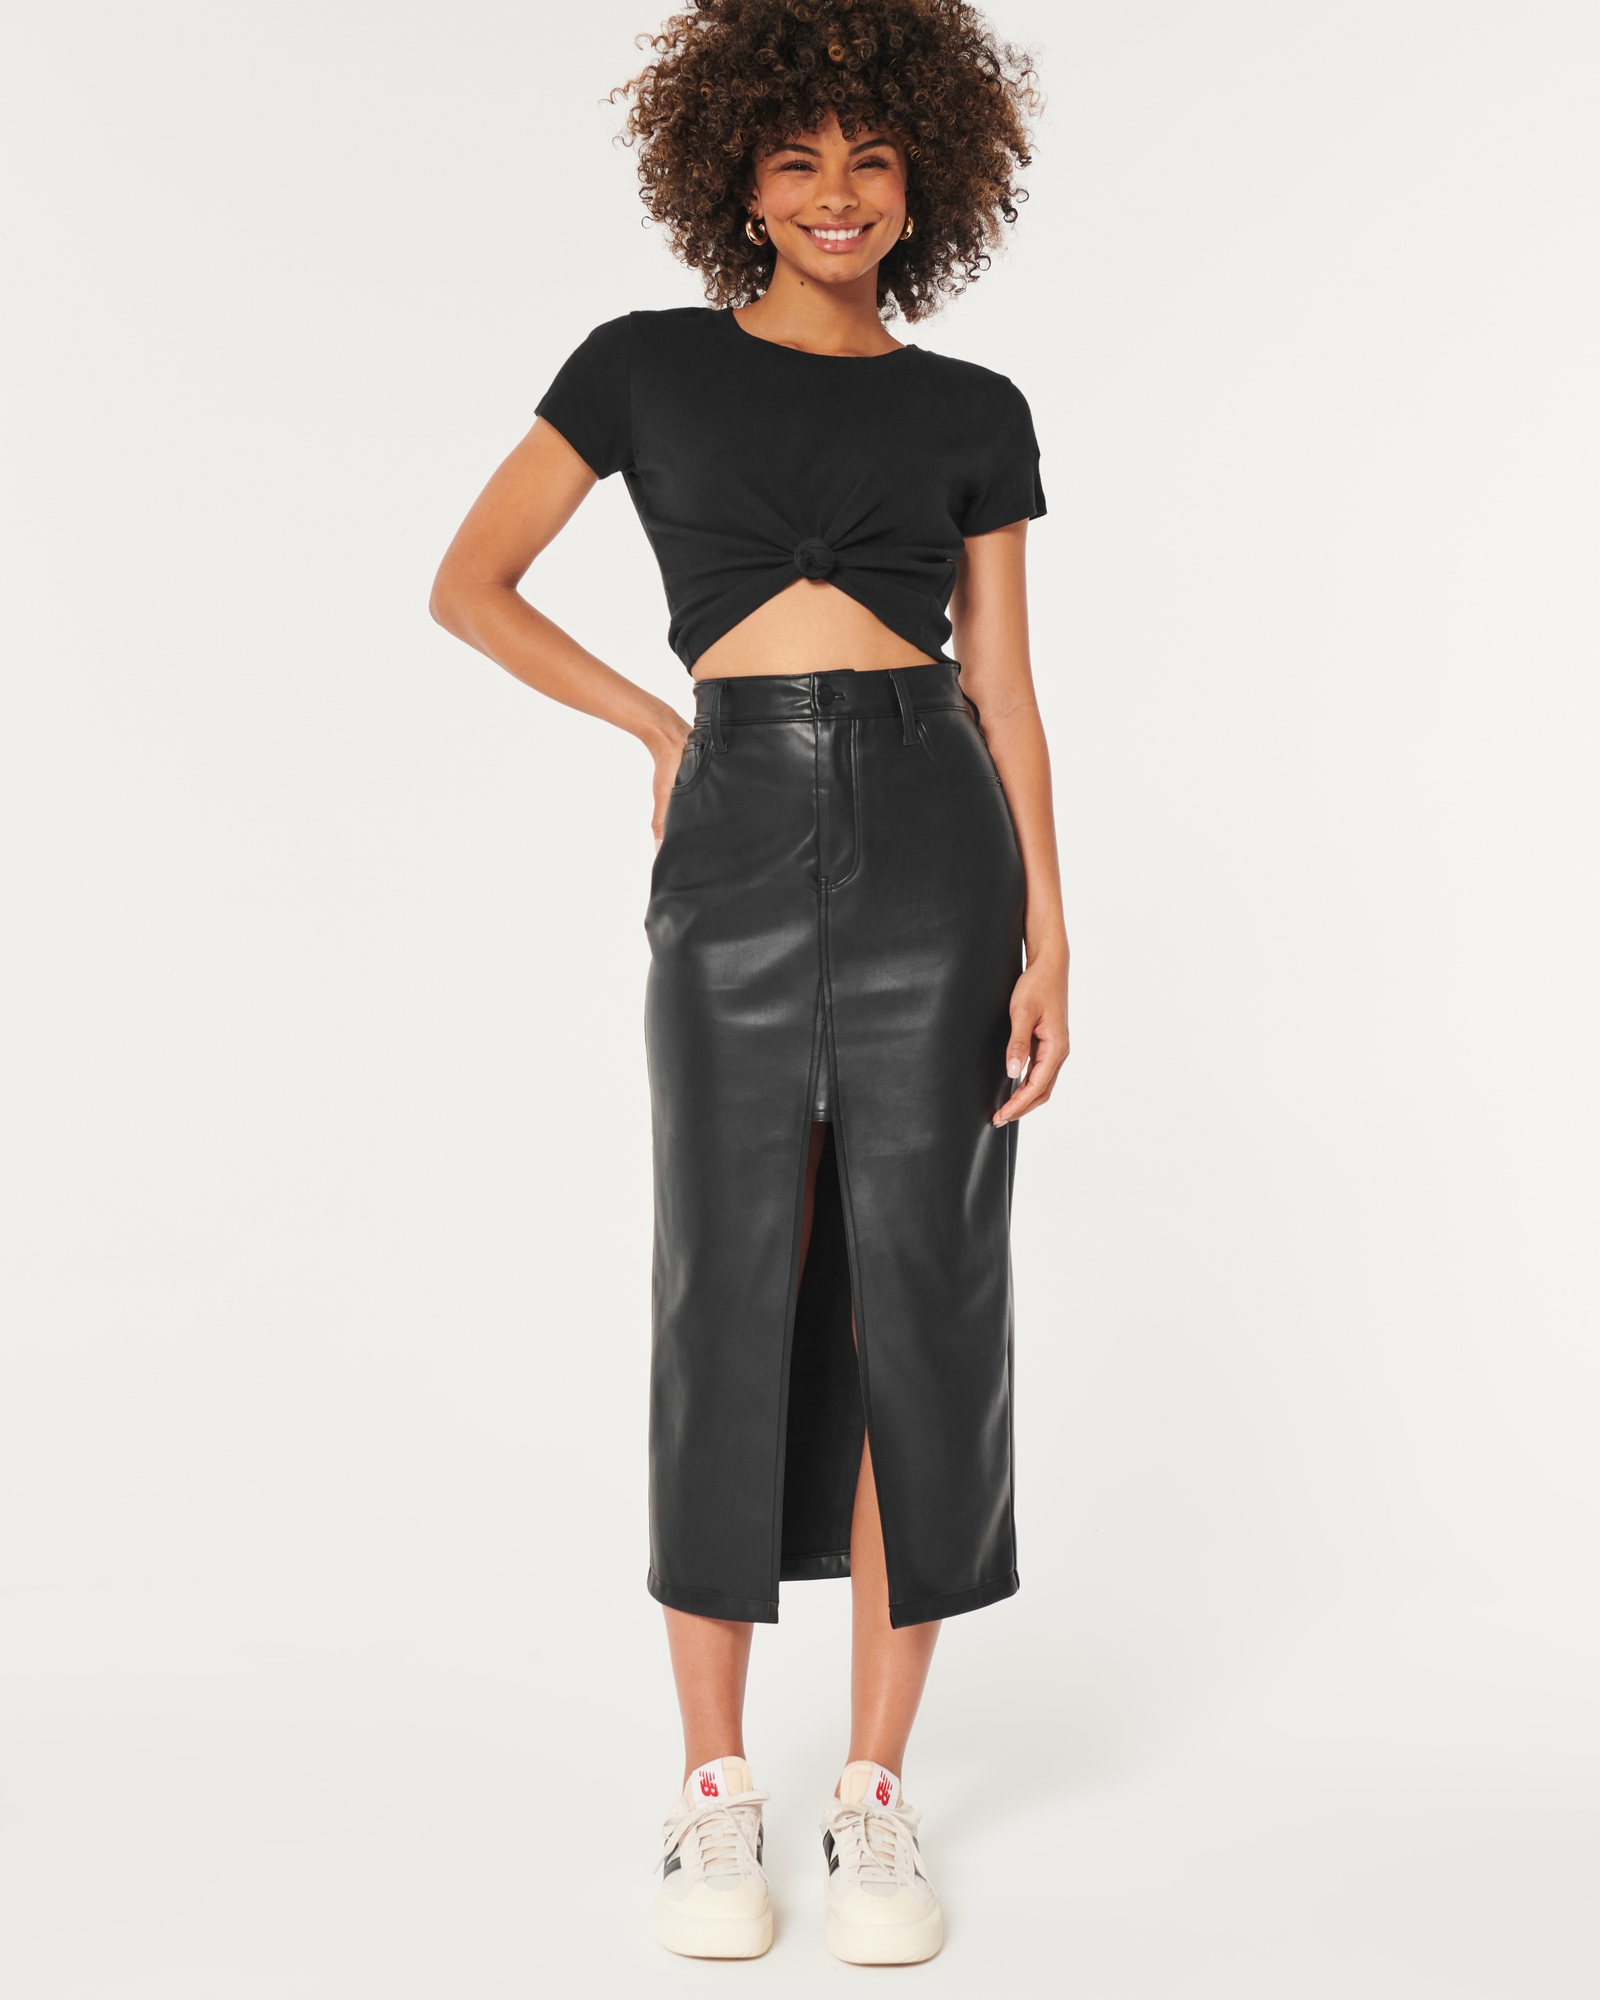 Women's High Rise Extra Stretch Pleather Skirt with Chain Fringe | Rock and Roll Denim - 28